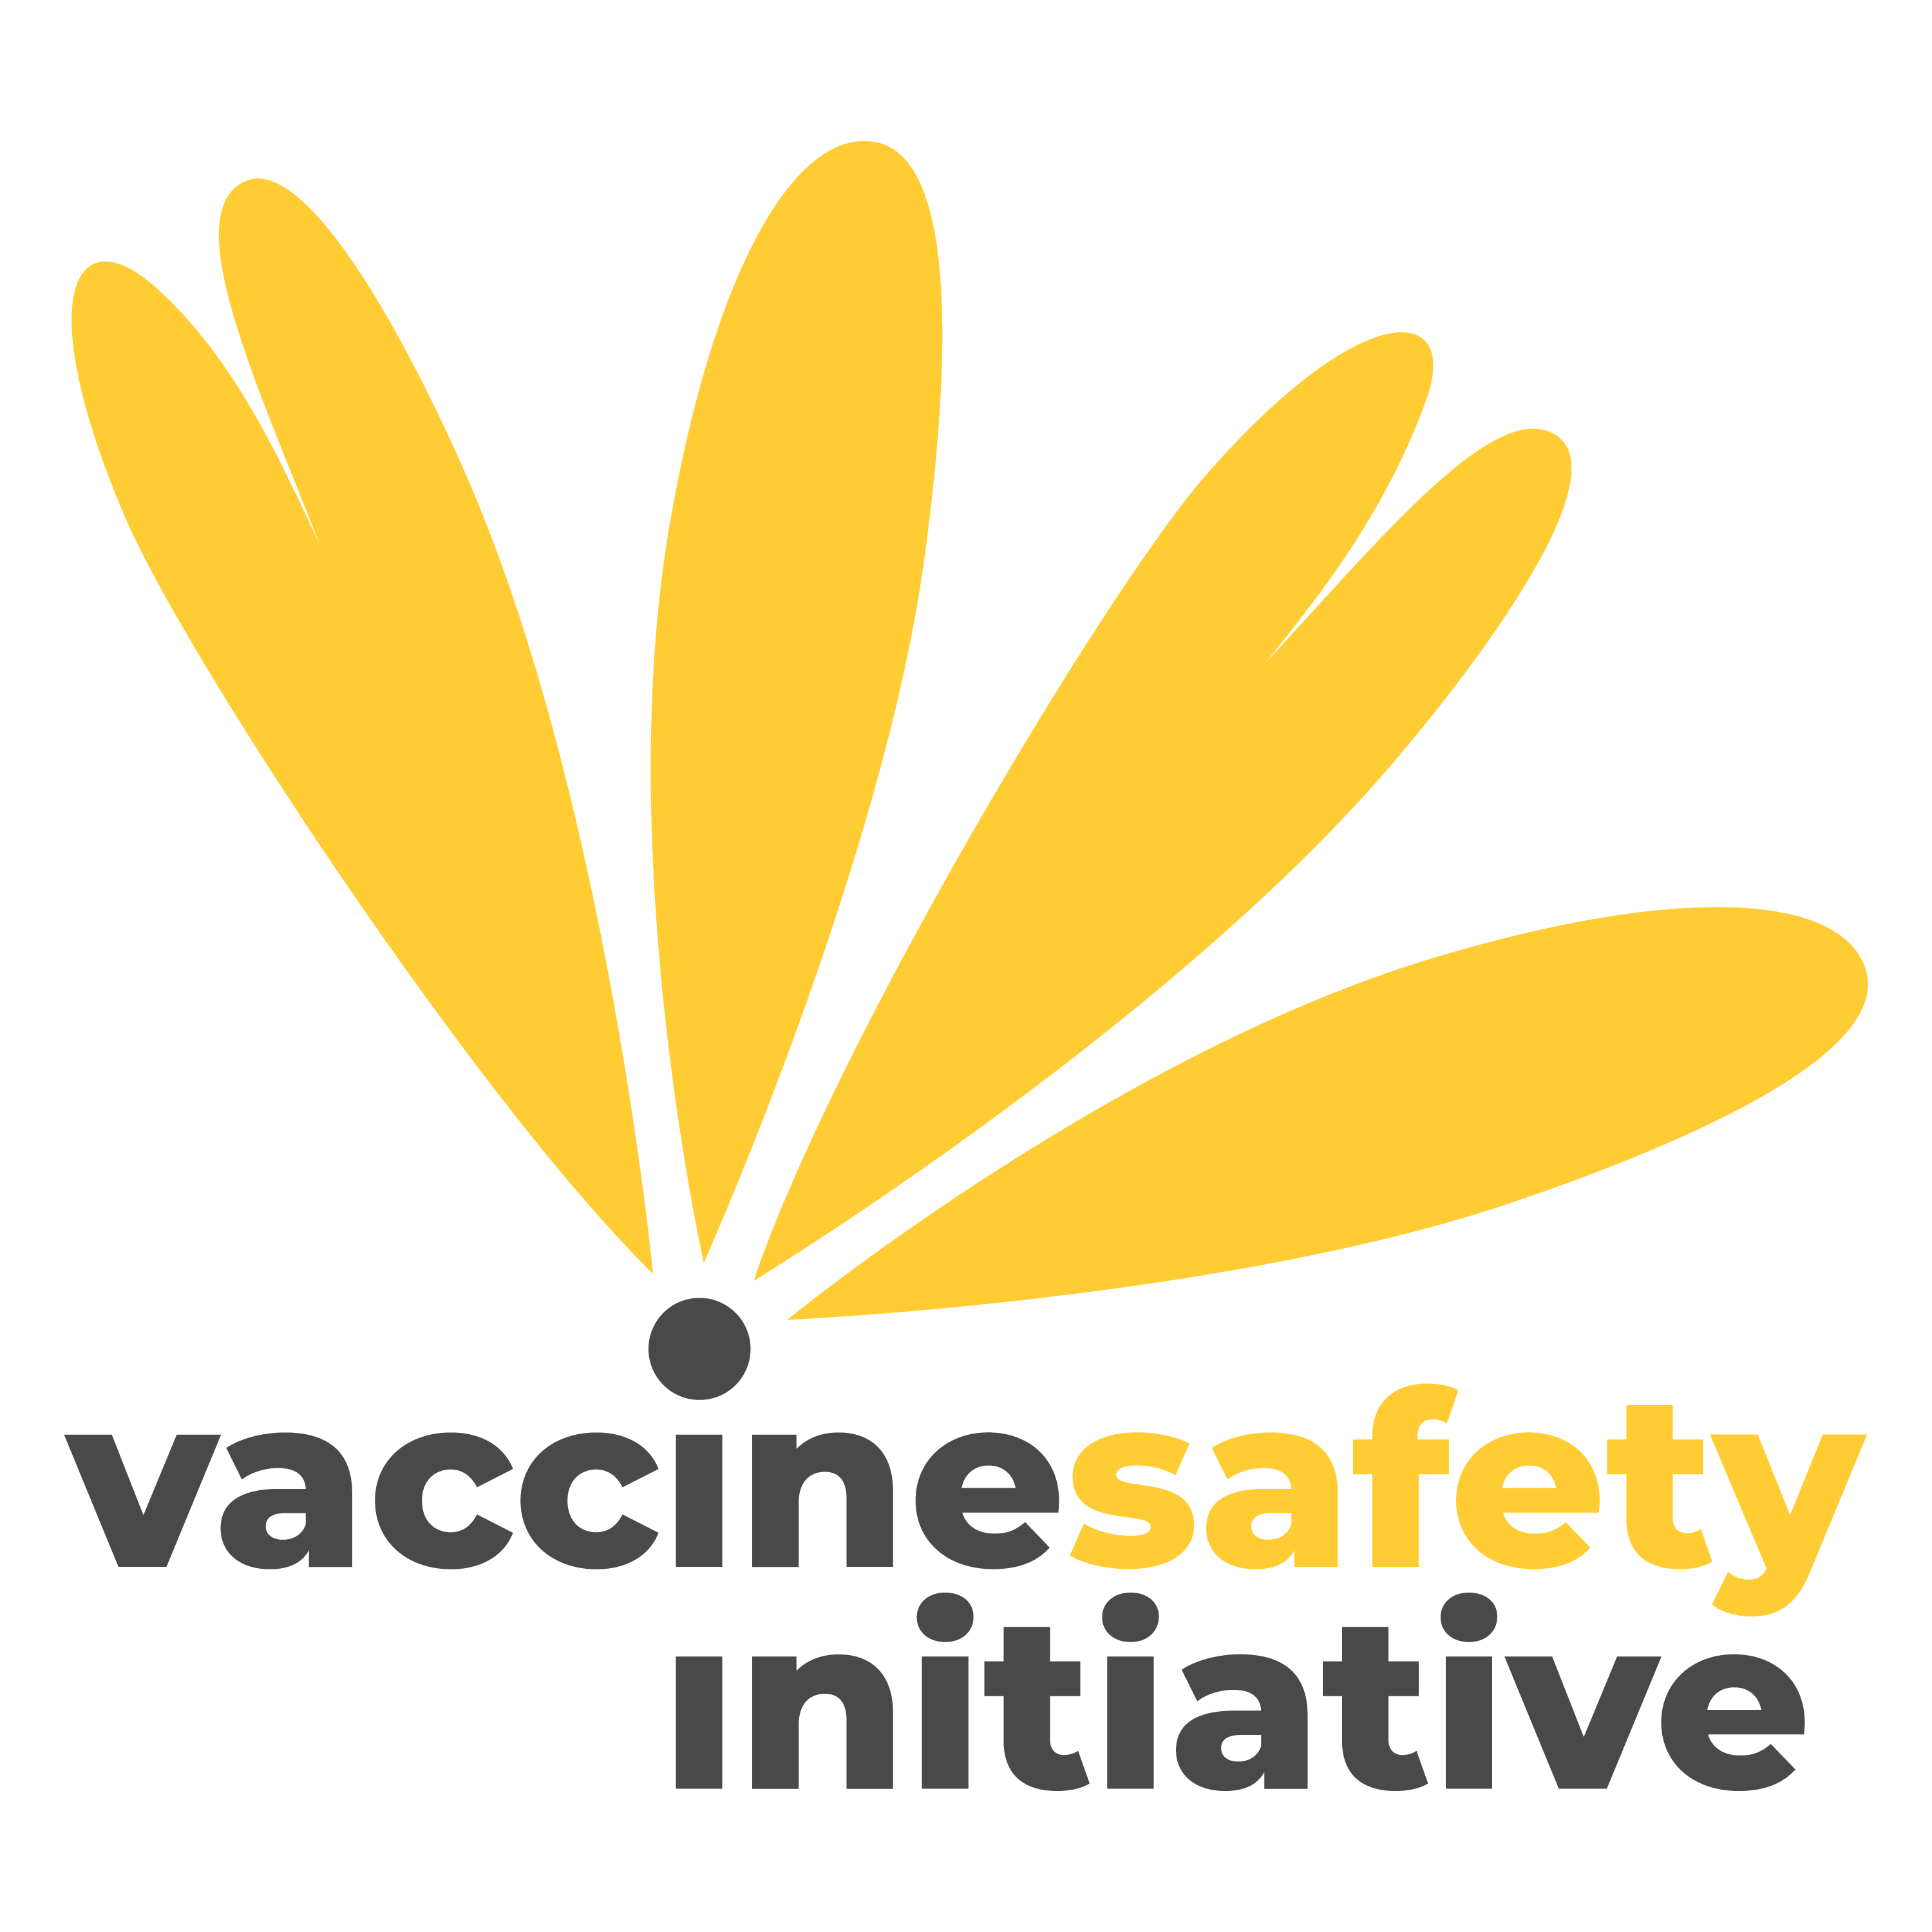 Vaccines Safety logo